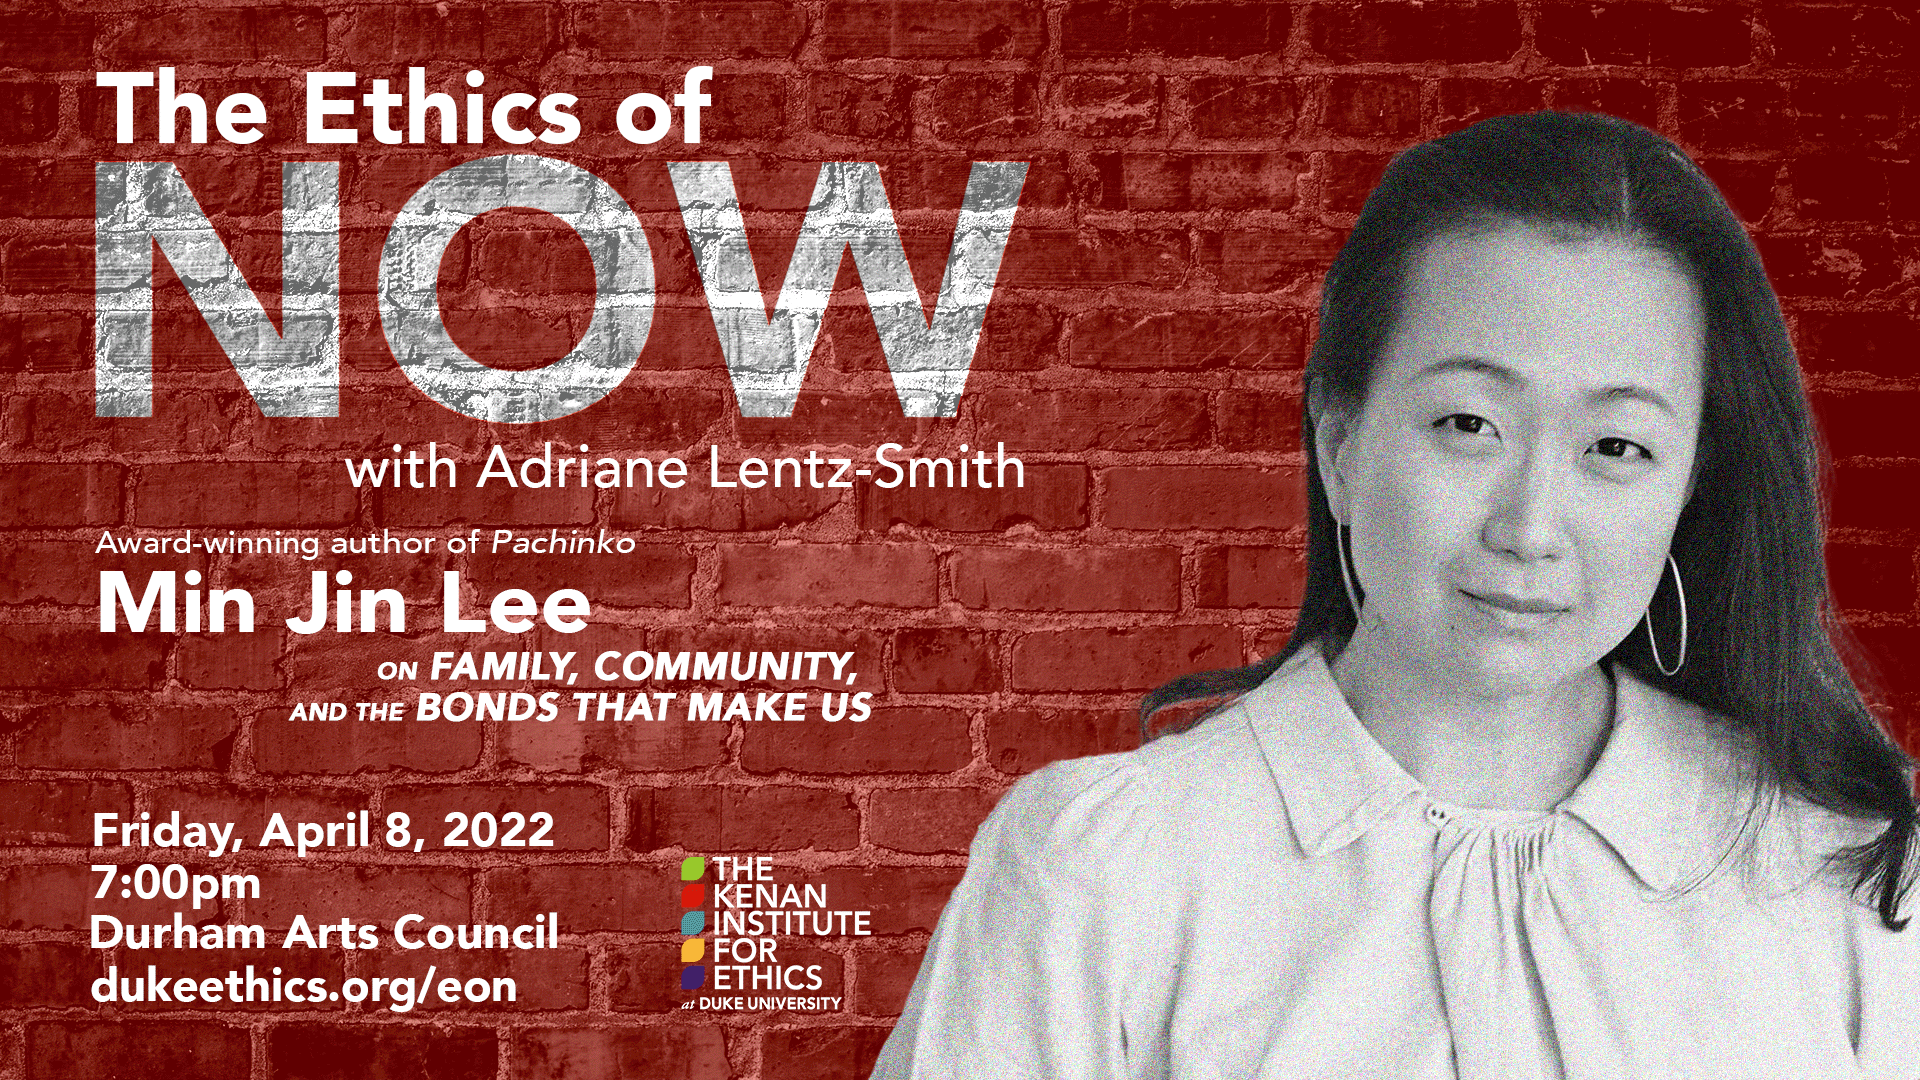 The Ethics of Now presents Min Jin Lee - The Kenan Institute for Ethics at  Duke University